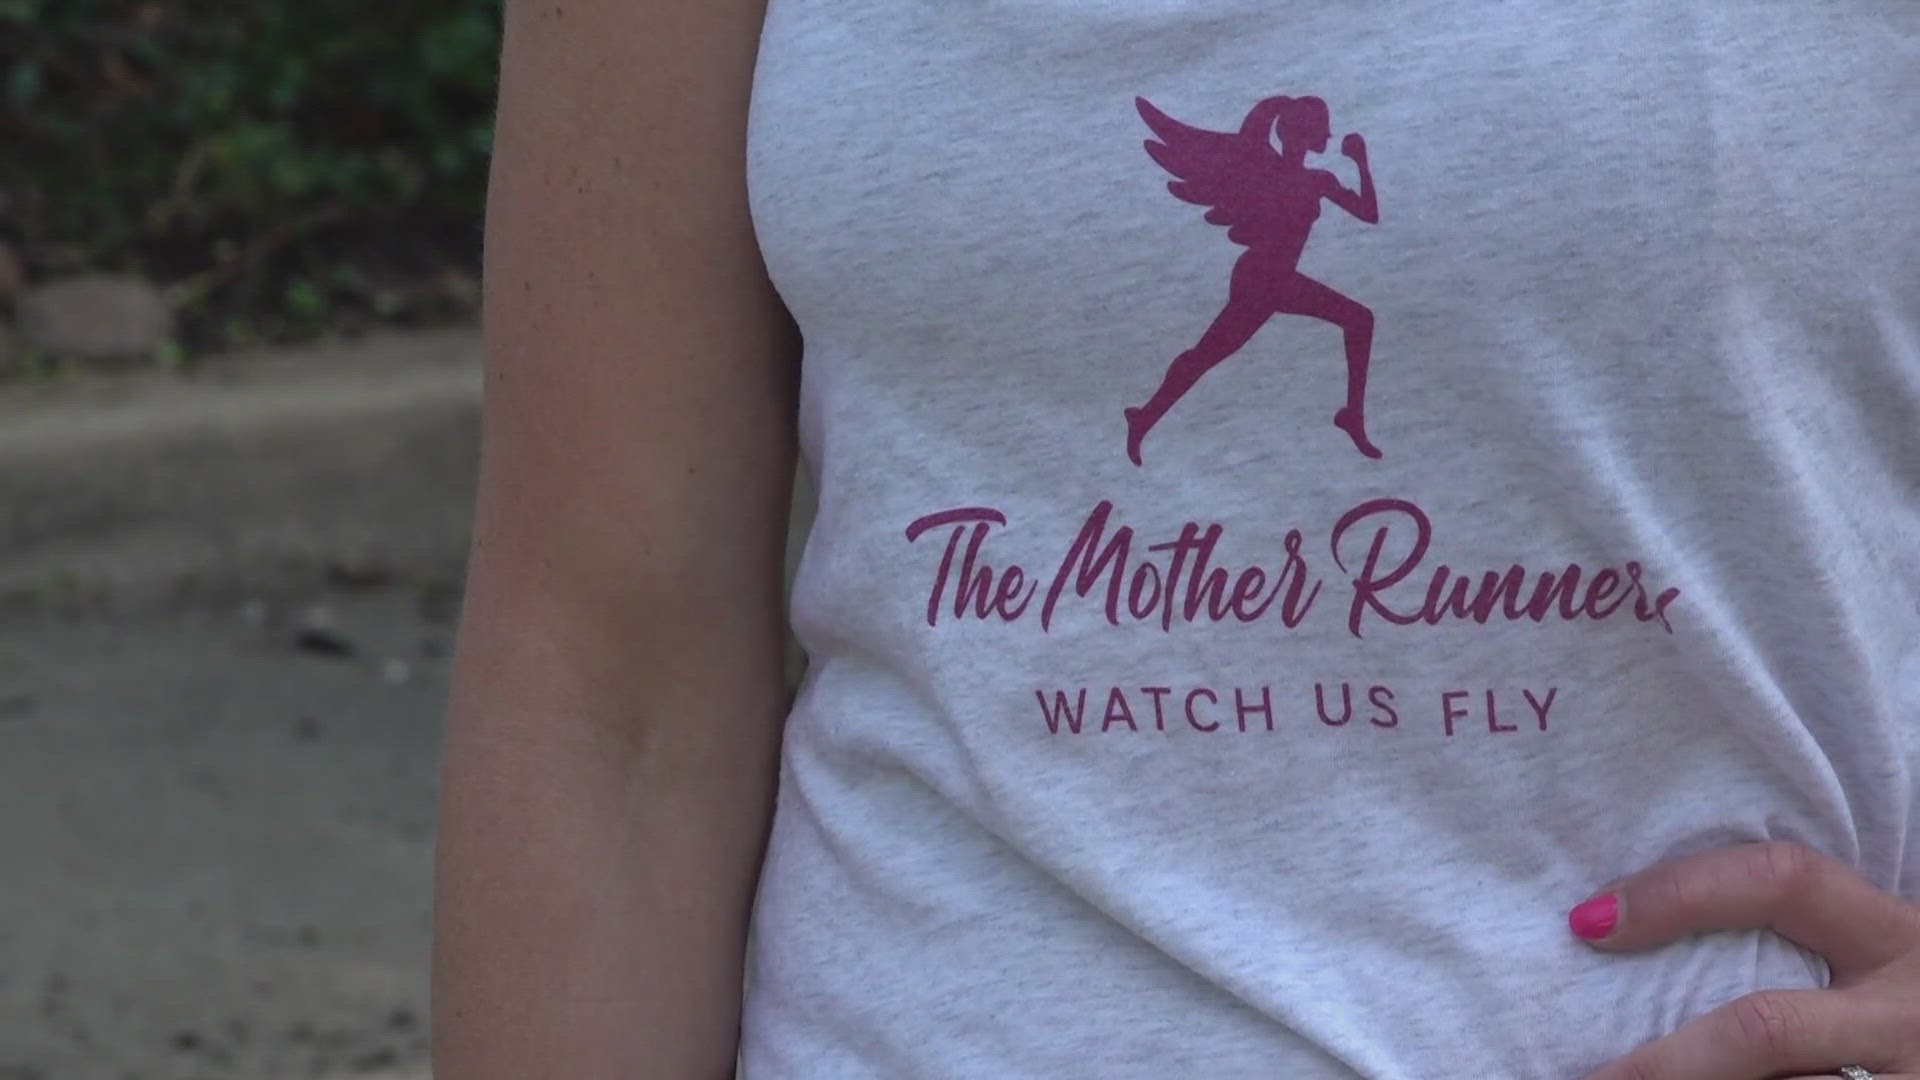 "Mother Runners" provides advice and encouragement to moms who are runners. It was started five years ago by a Knoxville woman.